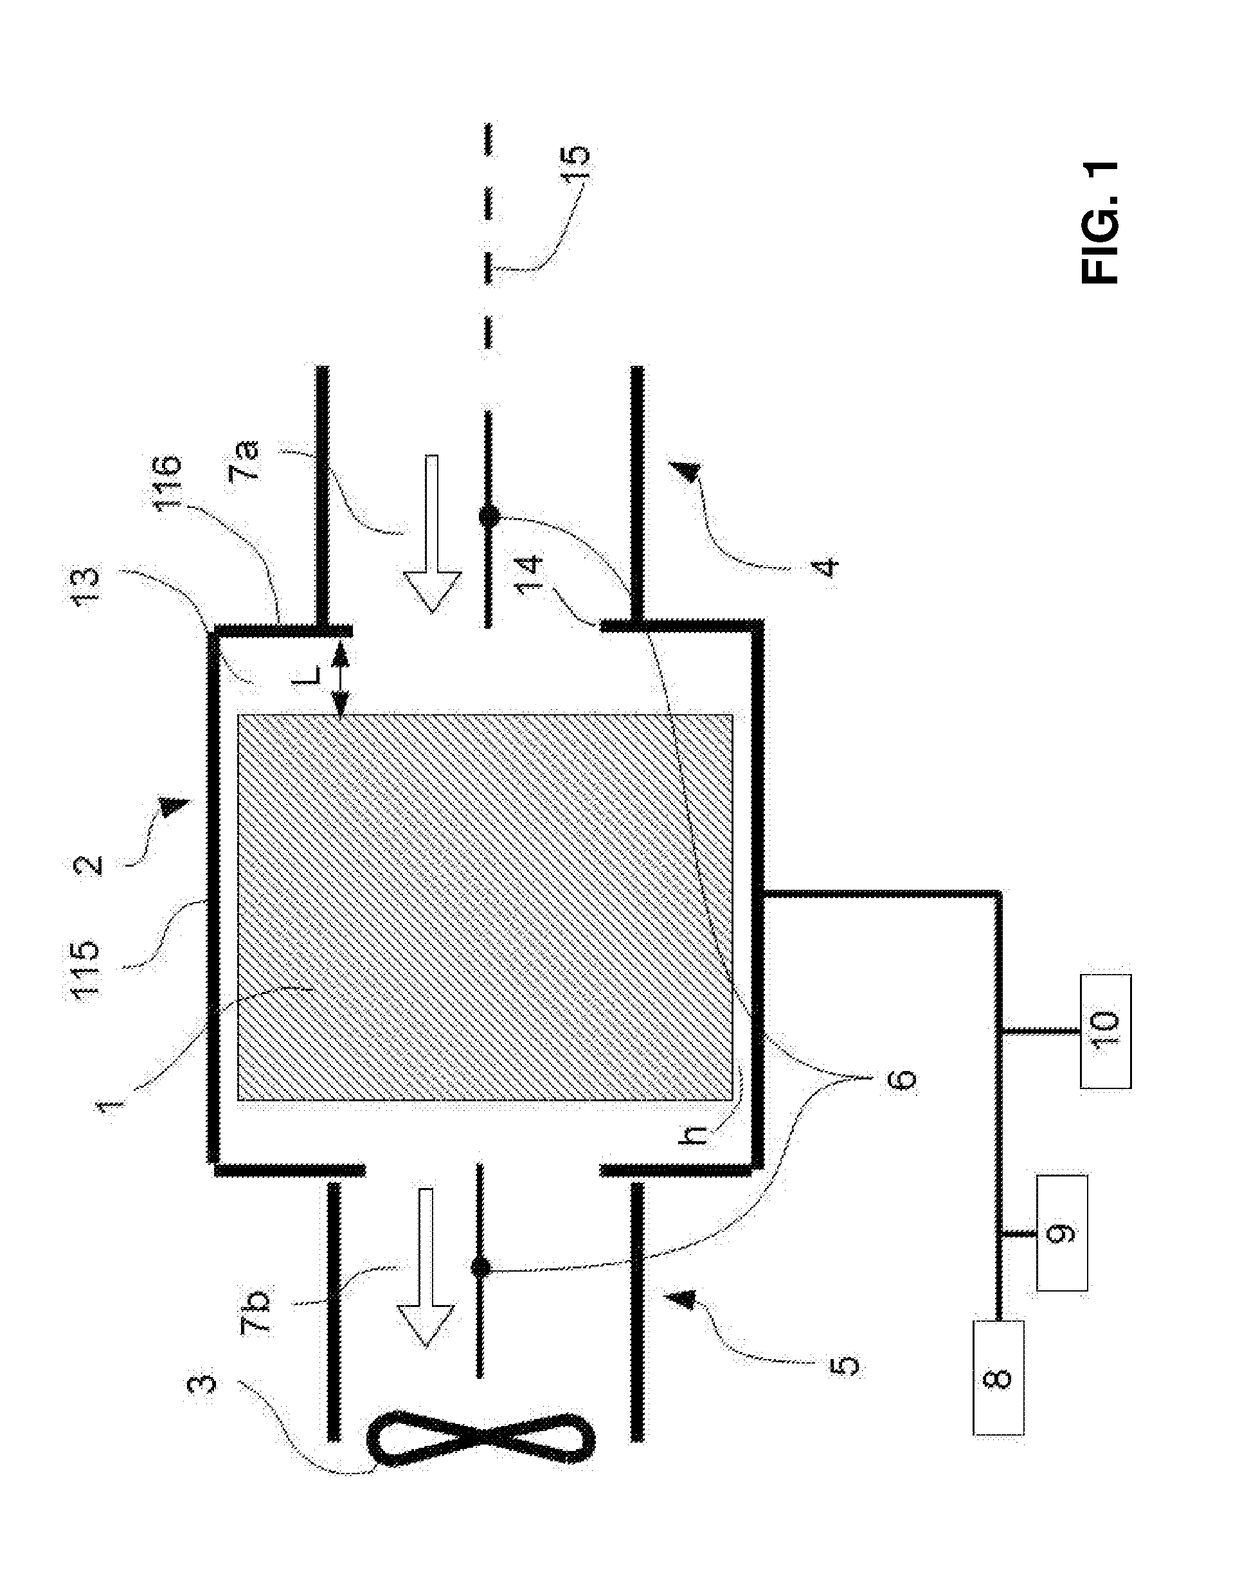 Direct air capture device